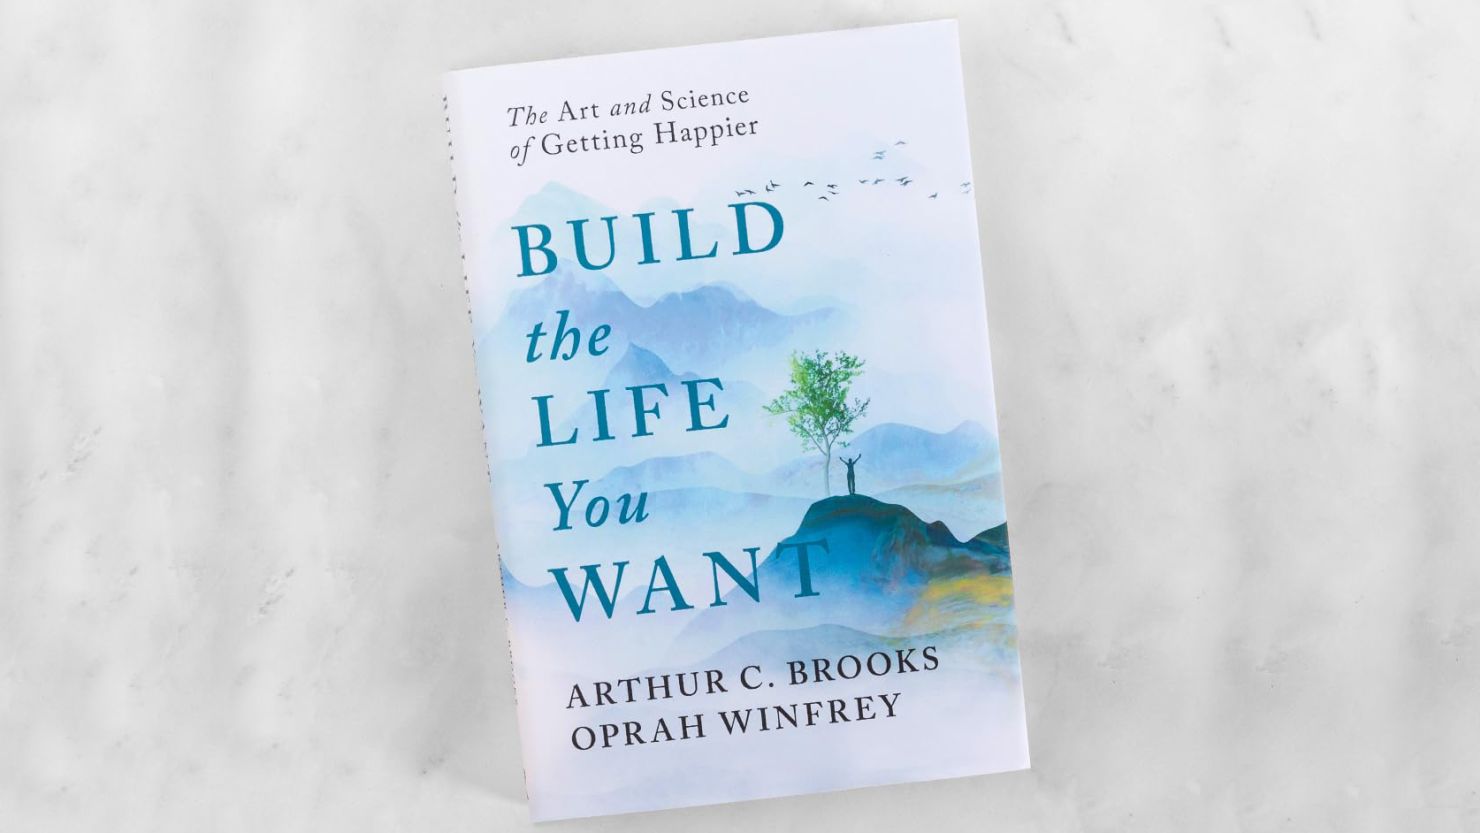 Oprah's No. 1 New York Times Bestseller 'Build the Life You Want' and  'Super Soul' podcast recap